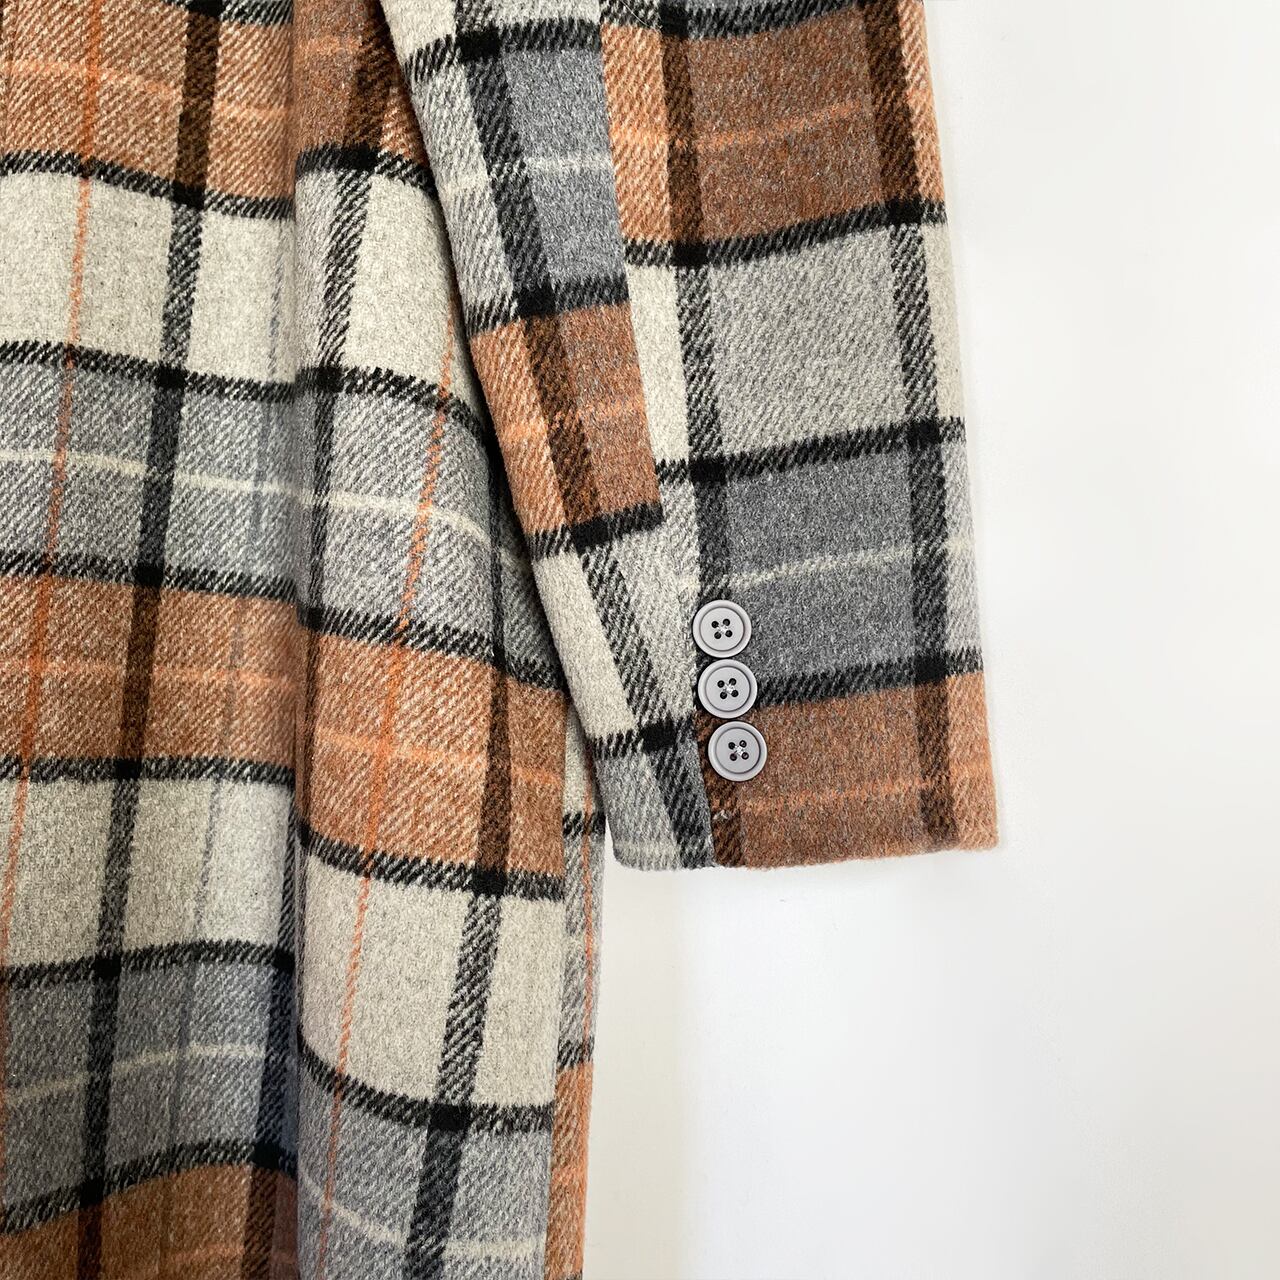 Woolly check chester coat